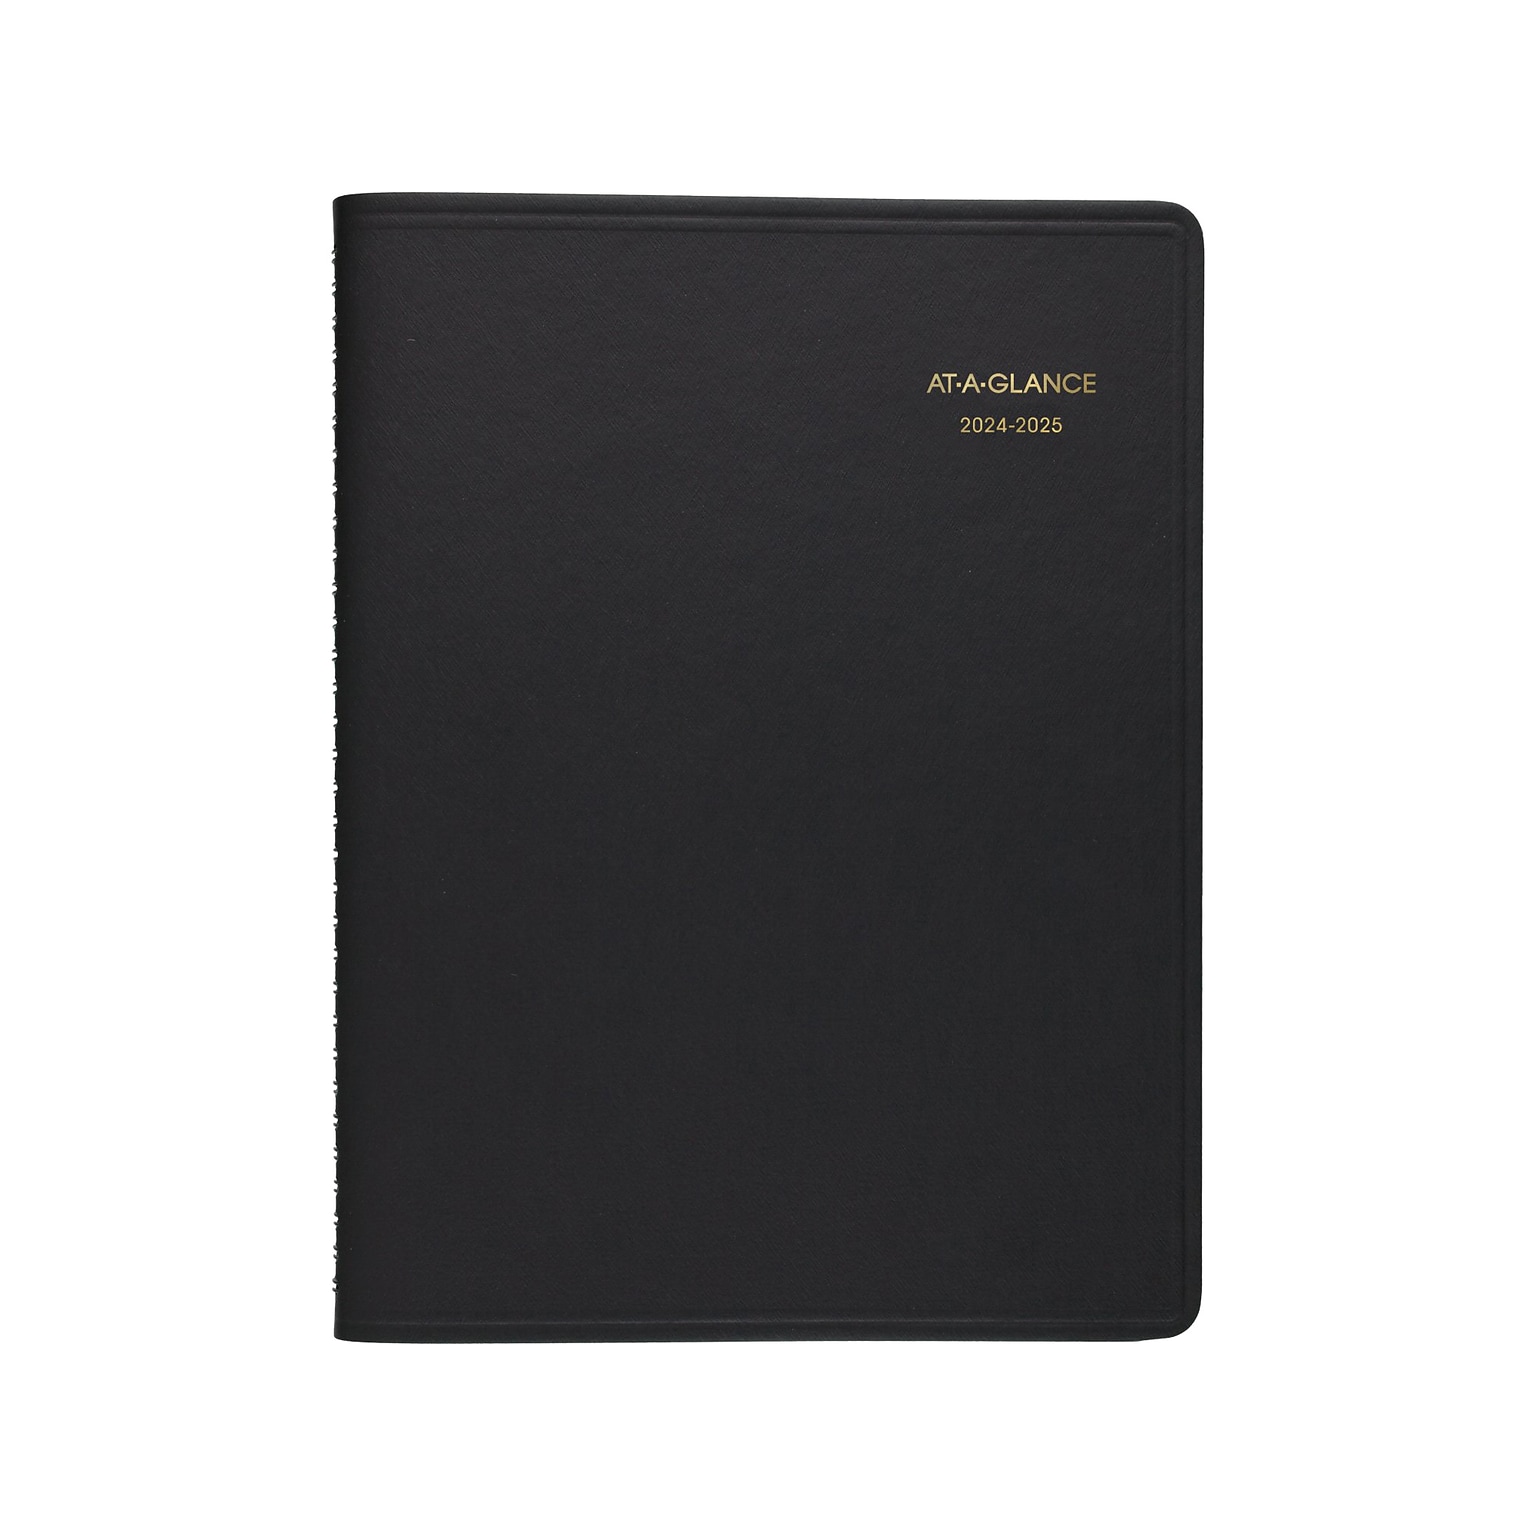 2024-2025 AT-A-GLANCE 8.25 x 11 Academic Weekly Appointment Book, Faux Leather Cover, Black (70-957-05-25)